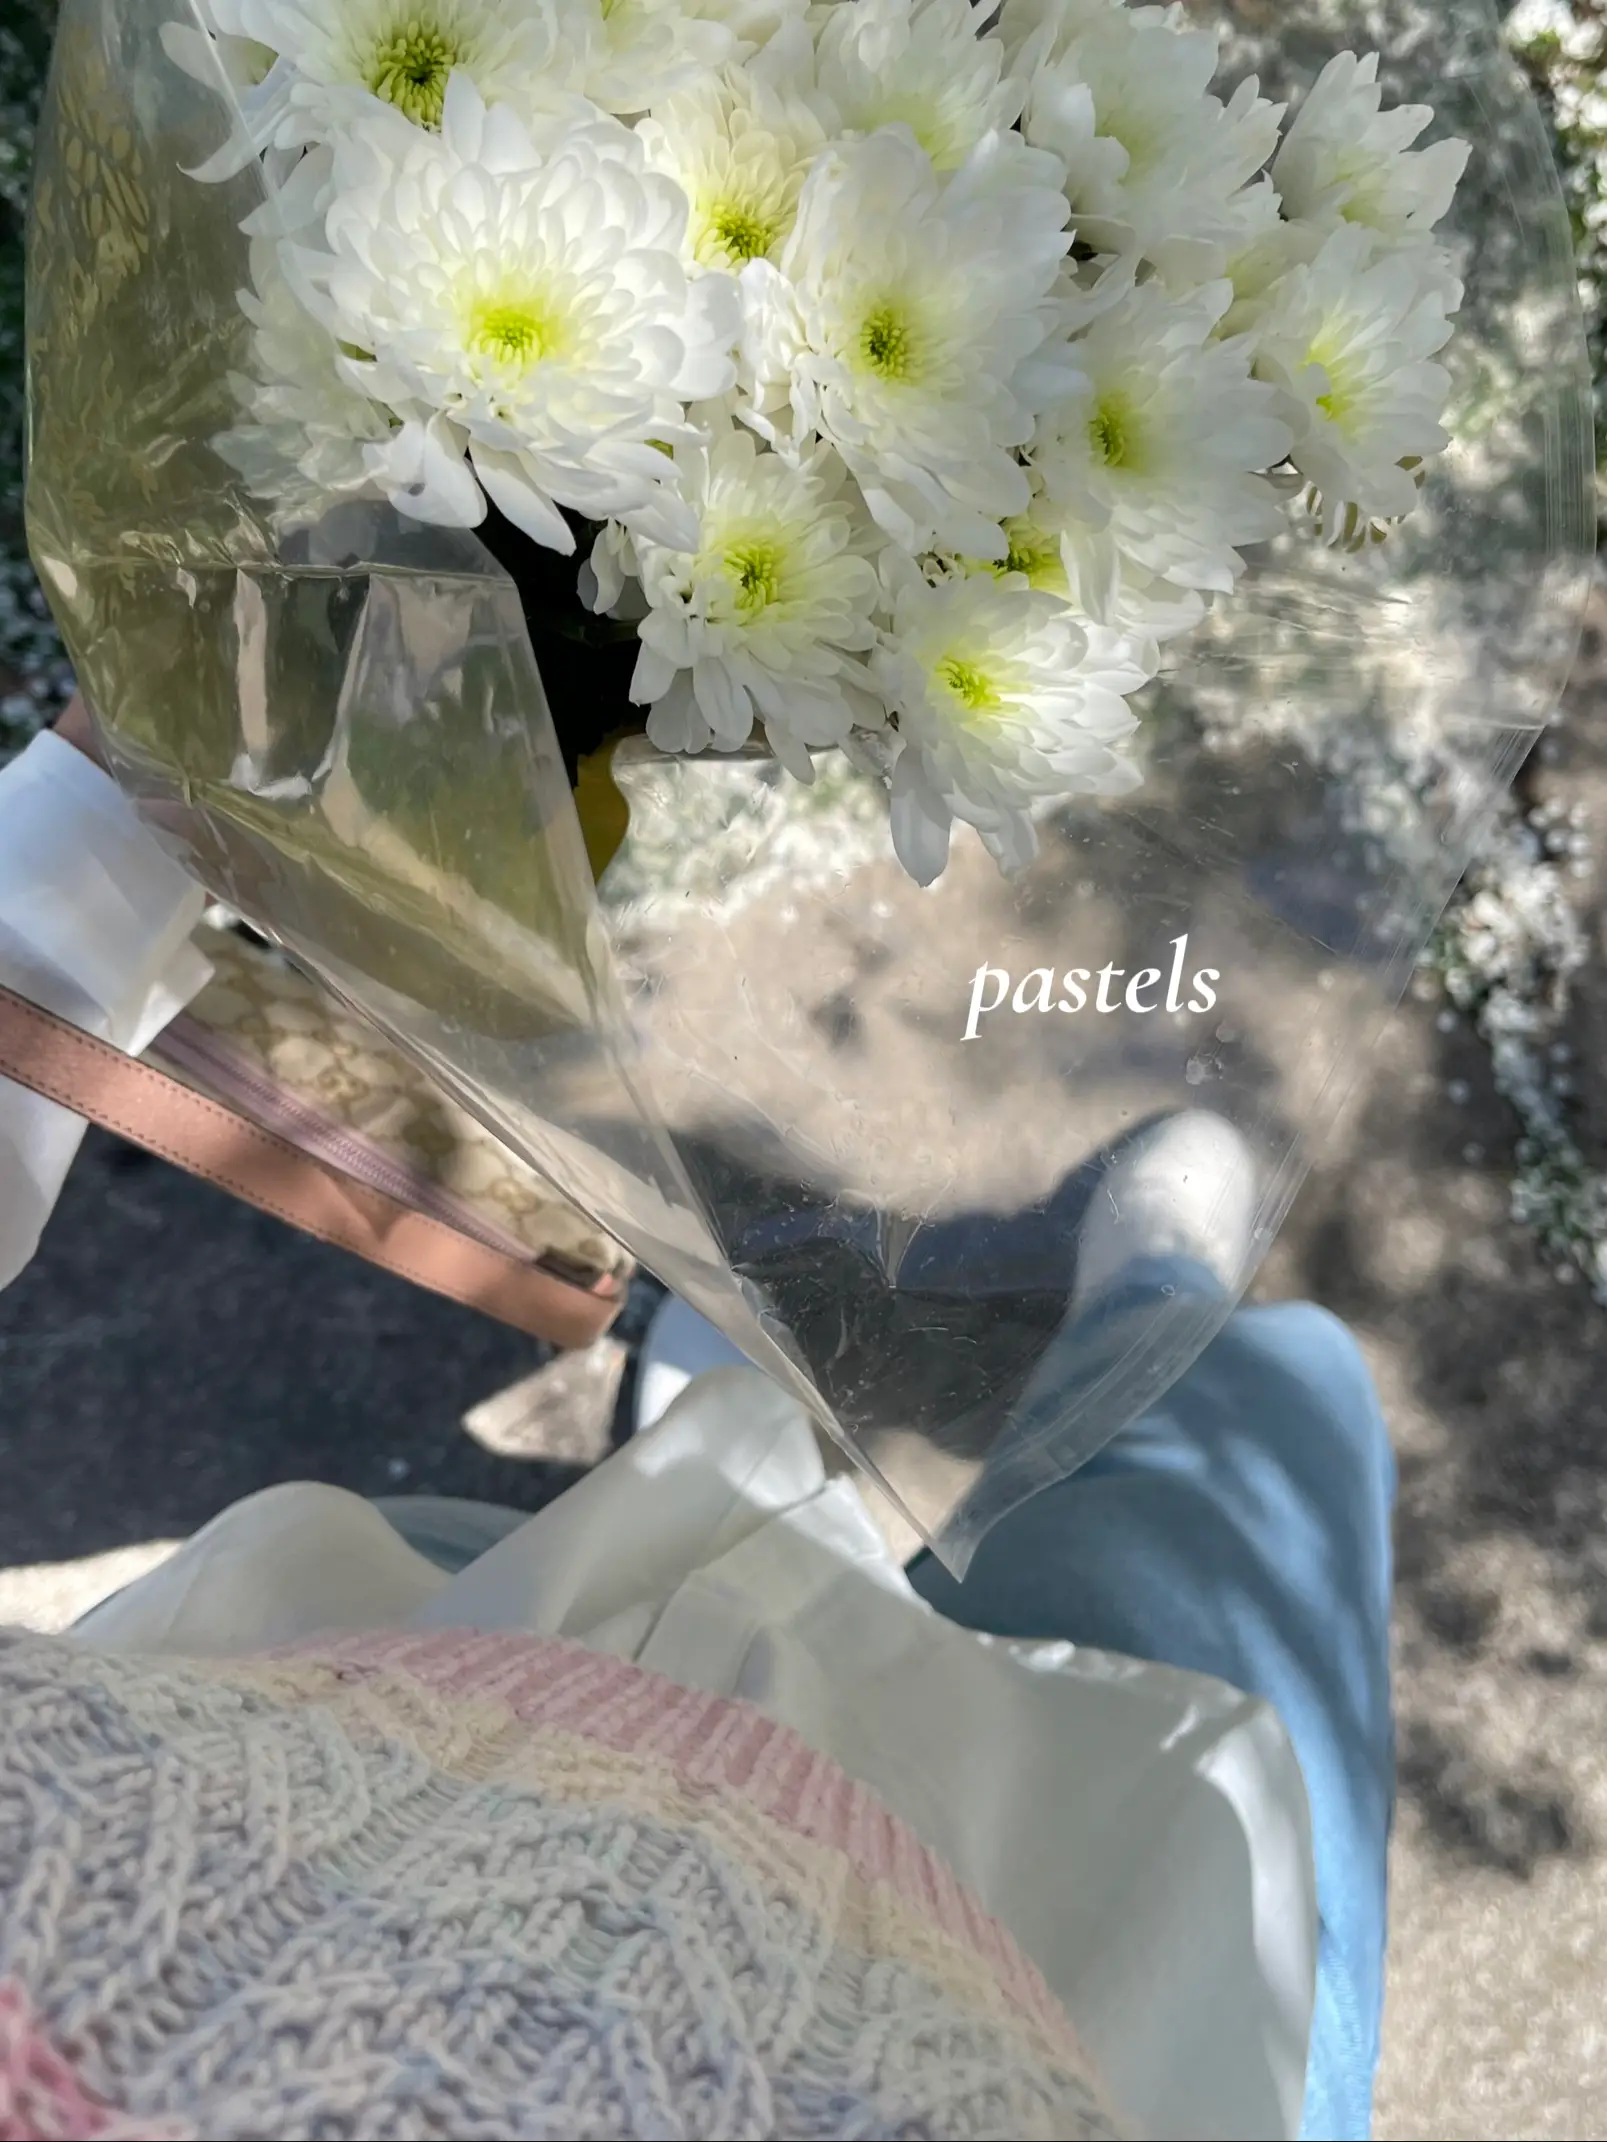  A bouquet of flowers in a vase with the words "pastels" written on the vase.